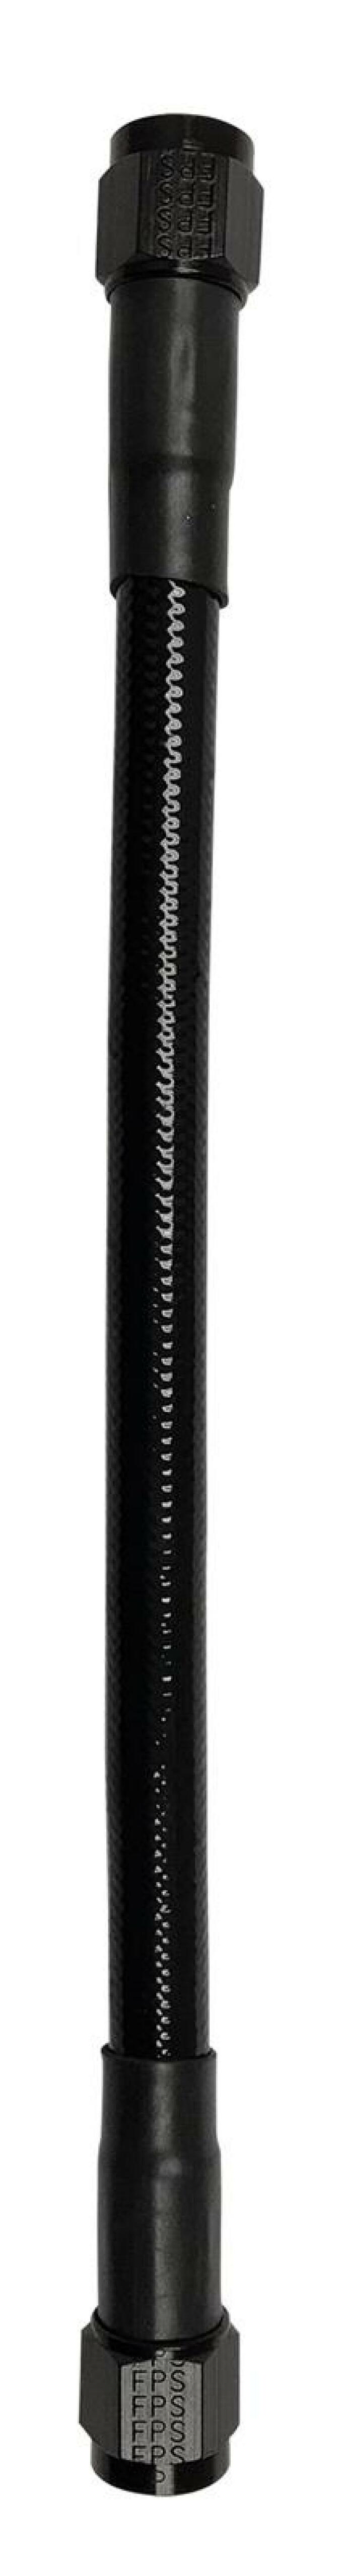 Fragola -10AN Ext Black PTFE Hose Assembly Straight x Straight 30in - 6029-1-1-30BL